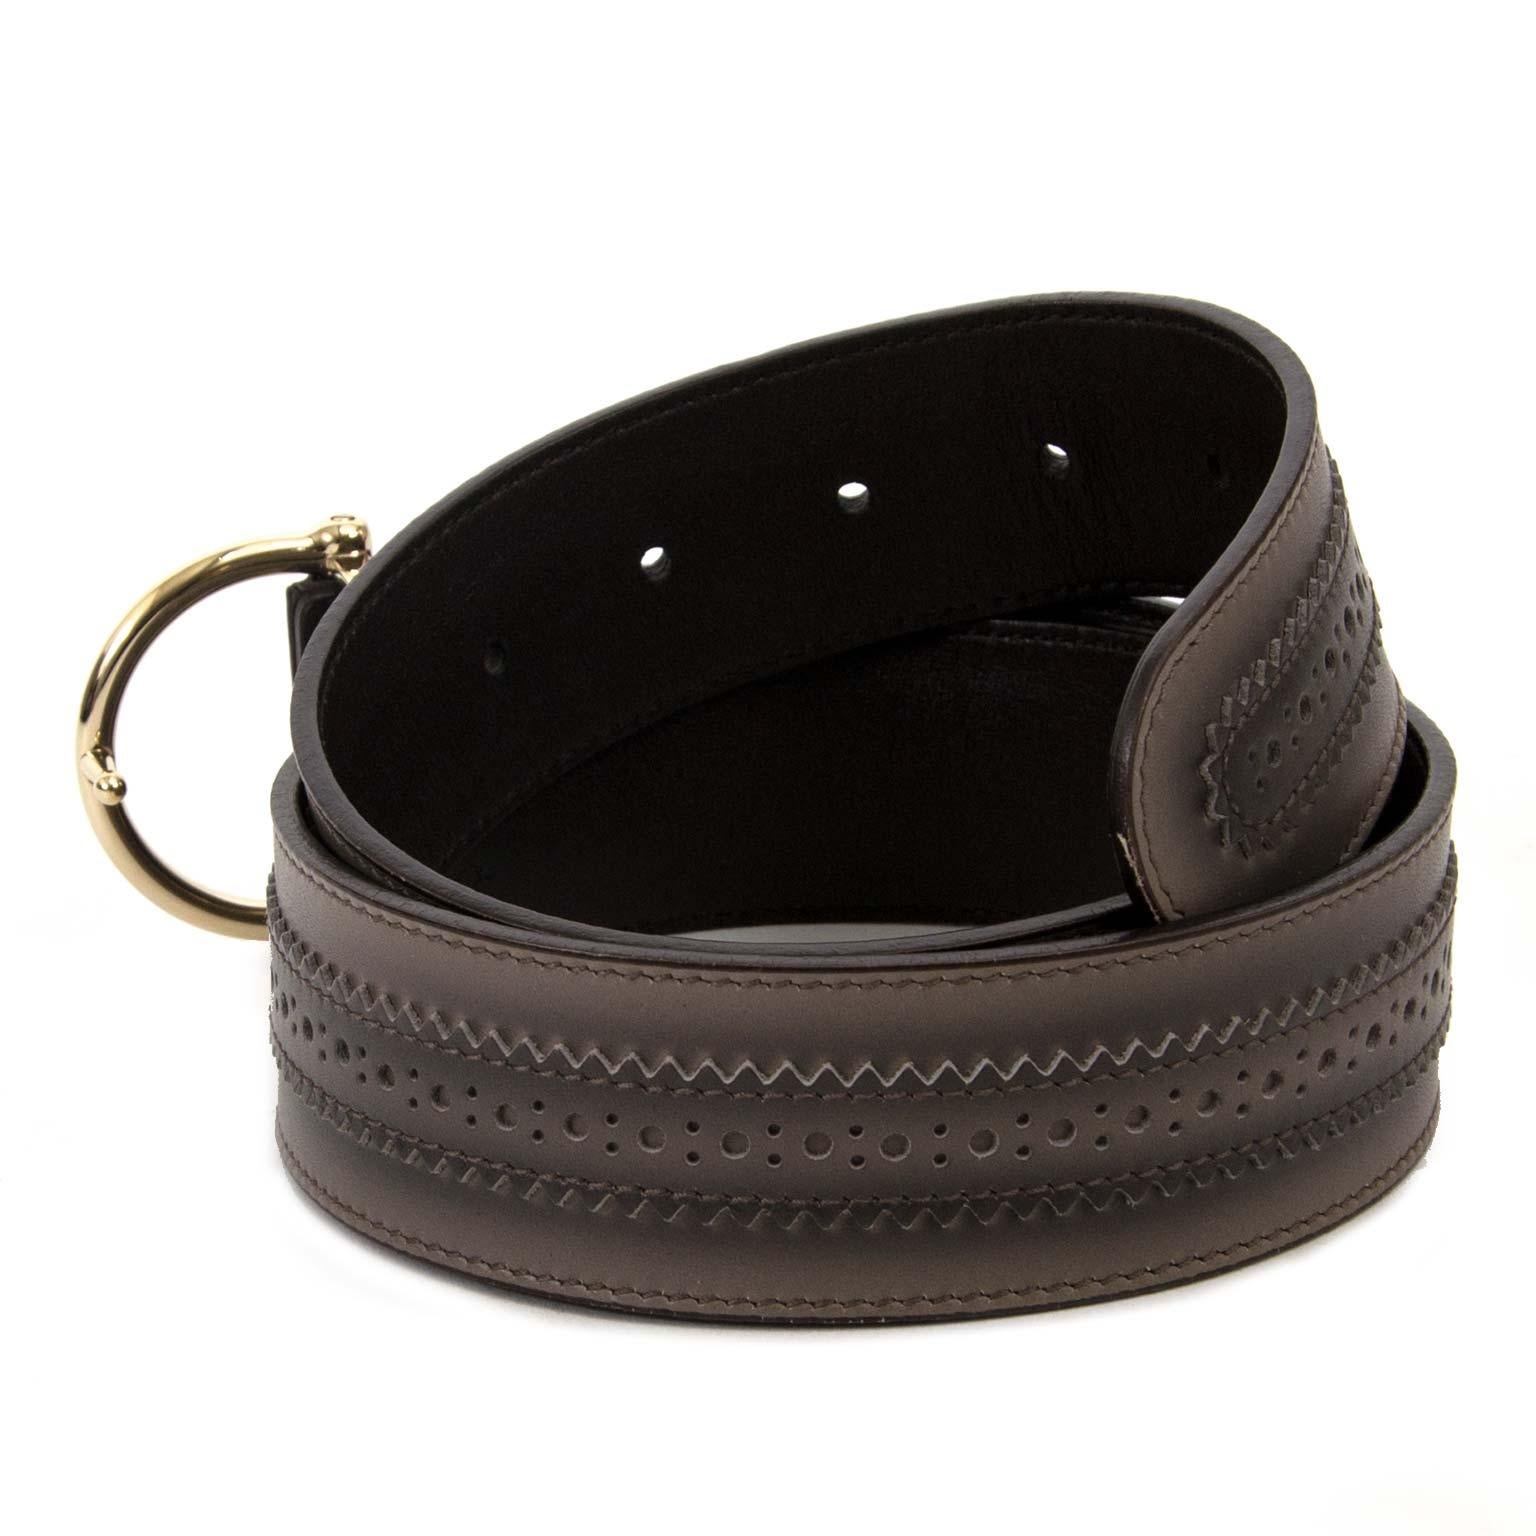 Very good condition

Gucci Grey Leather Horsebit Belt - Size 85

This gorgeous belt by Gucci is crafted in structured and perforated brownish grey leather.
It features a gold-toned horsebit buckle.
A beautiful belt that will complete any outfit!